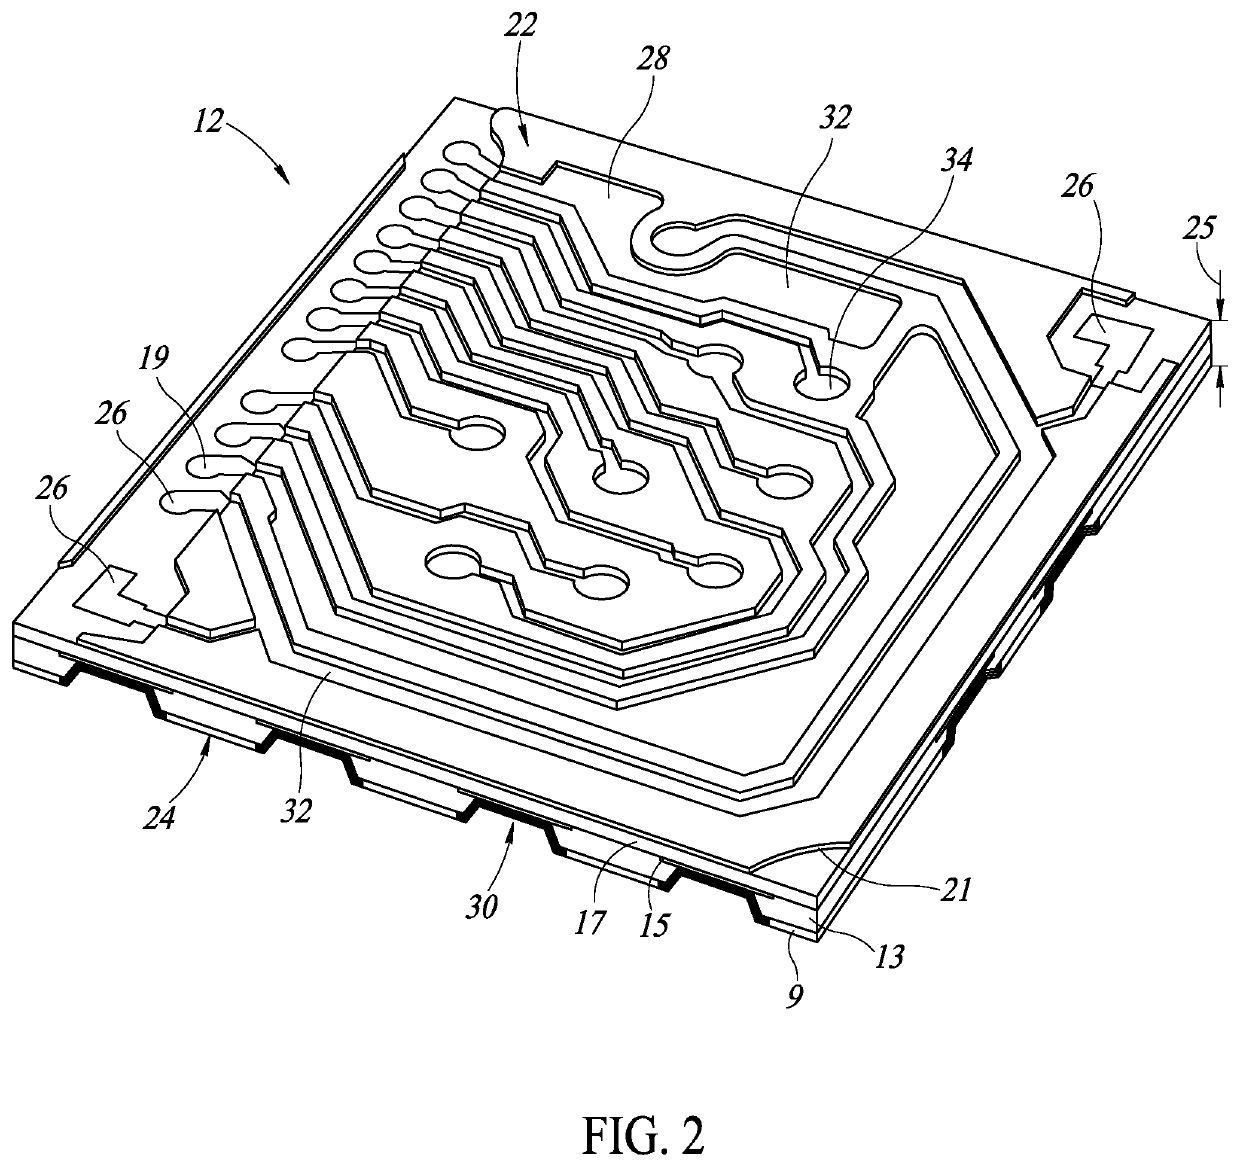 Semiconductor package with wettable slot structures